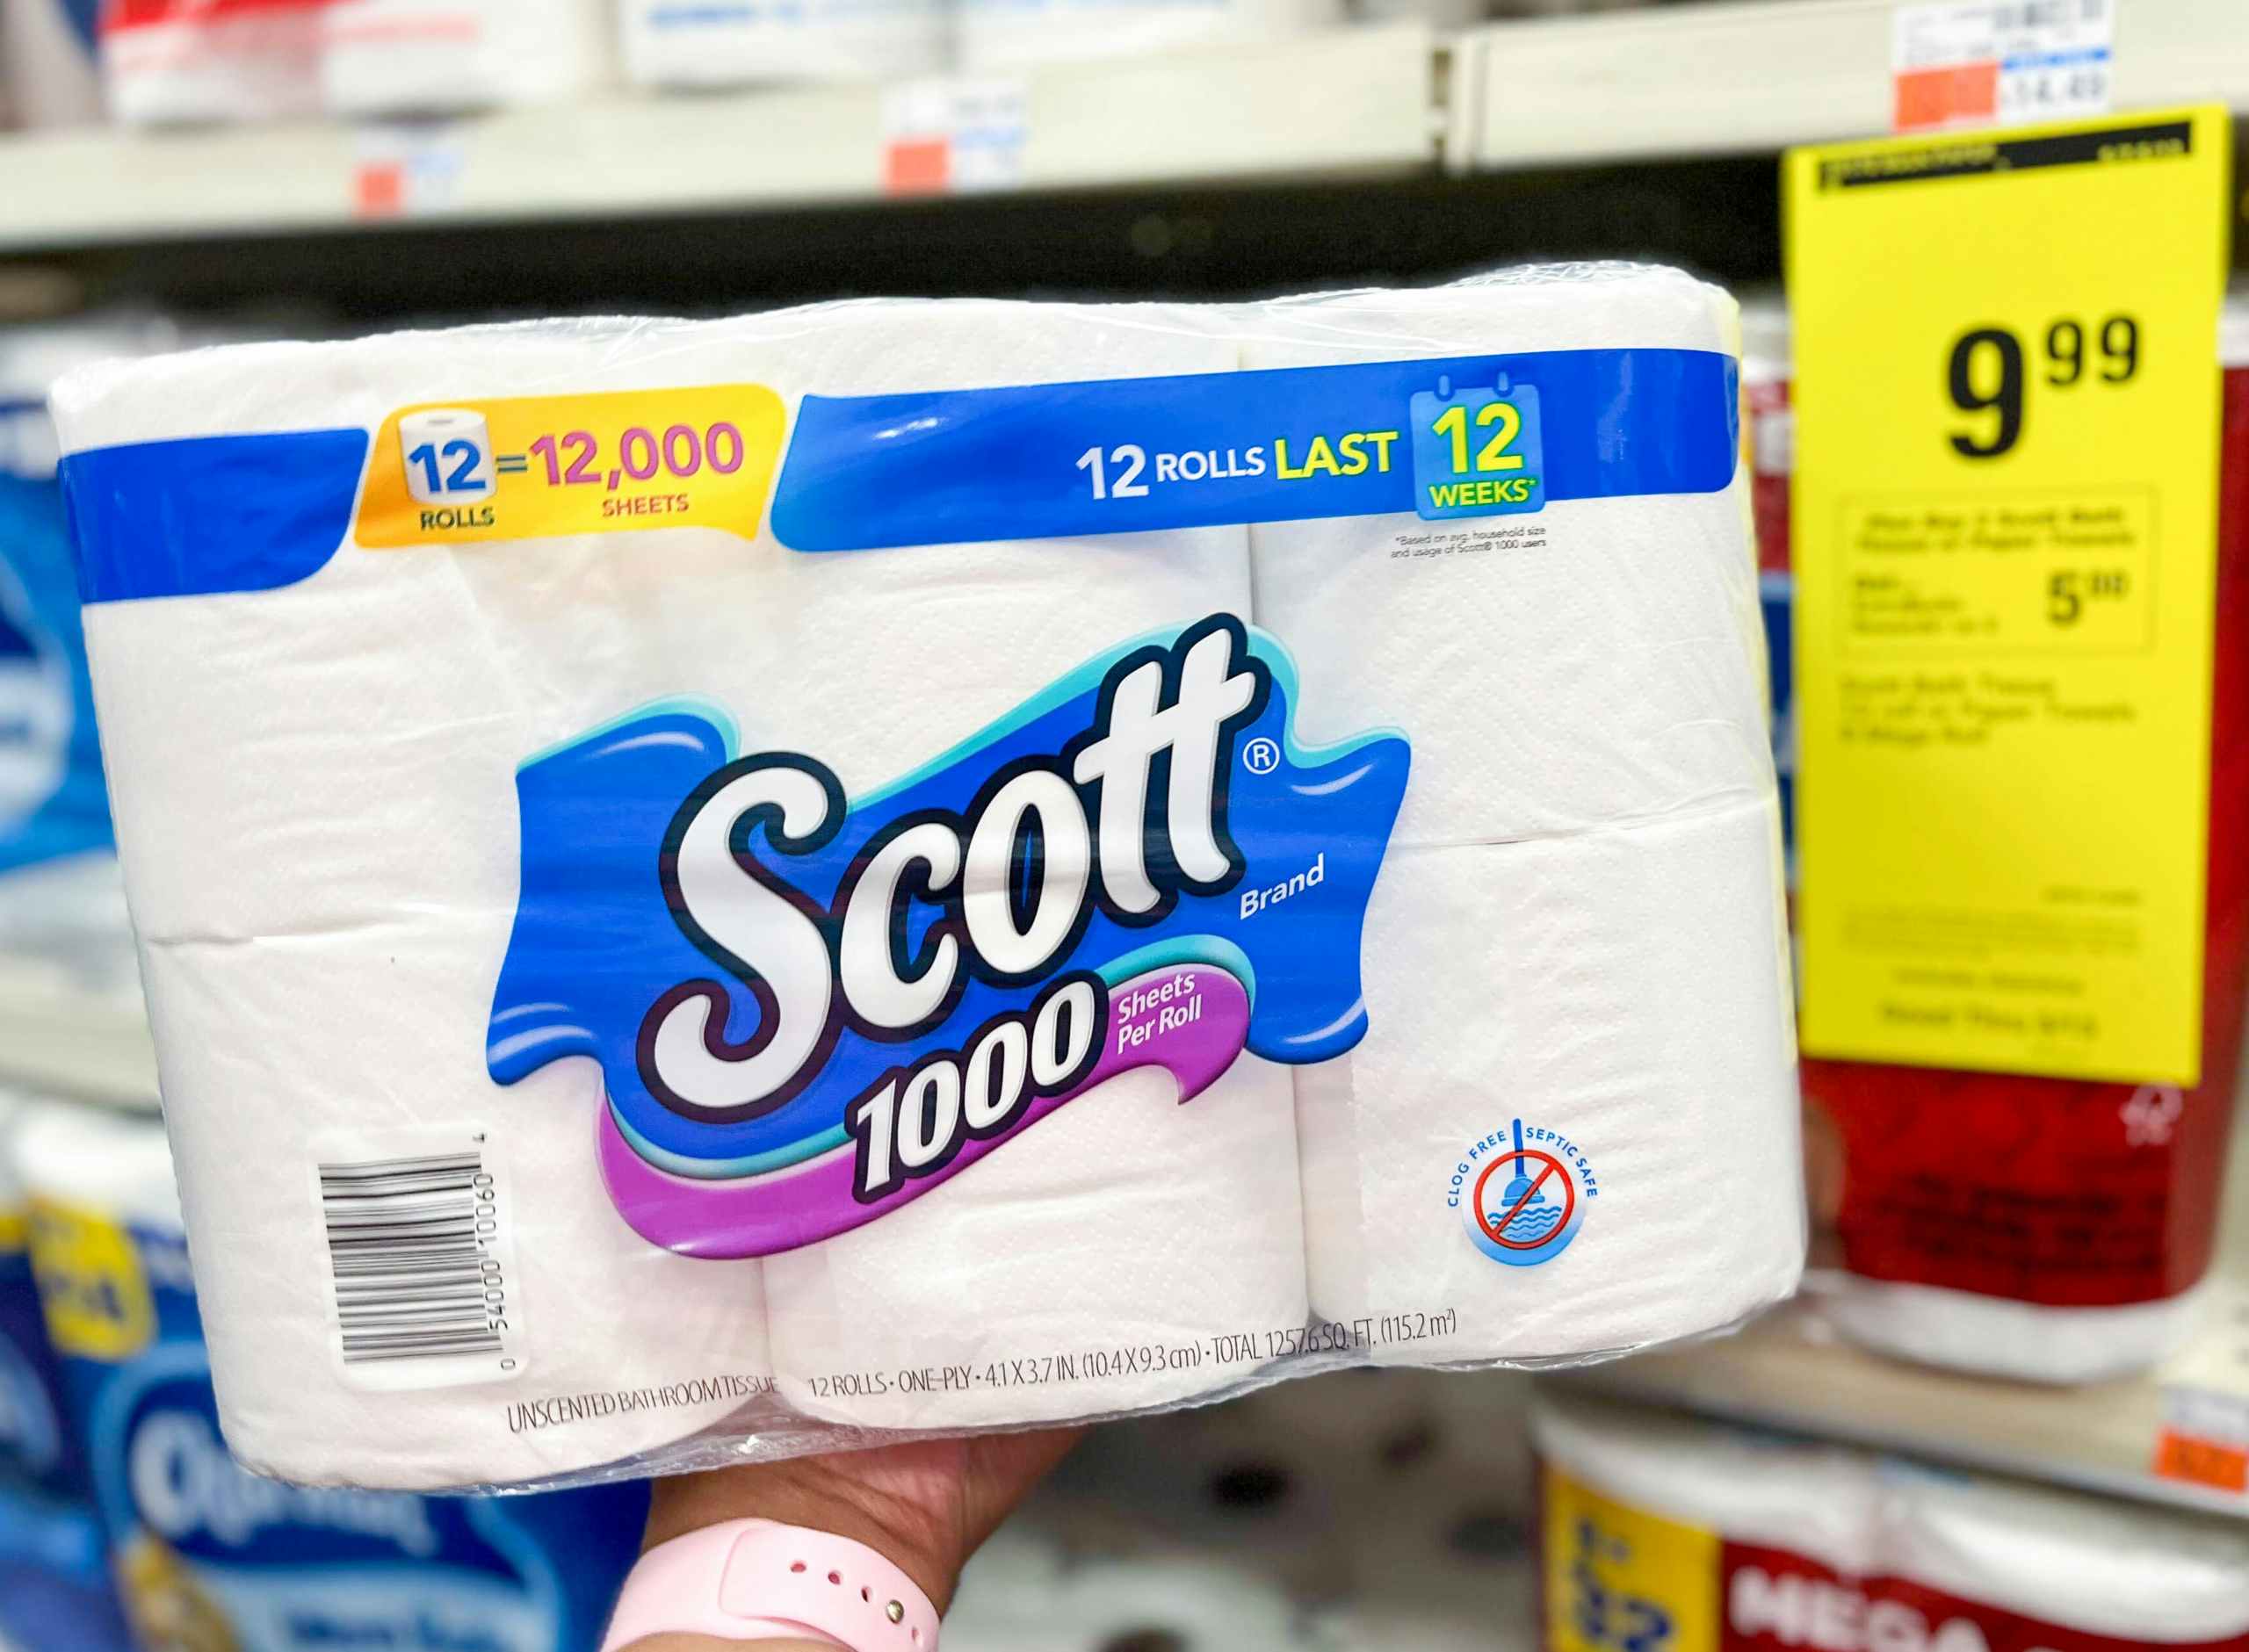 hand holding pack of Scott 1000 toilet paper next to sales tag